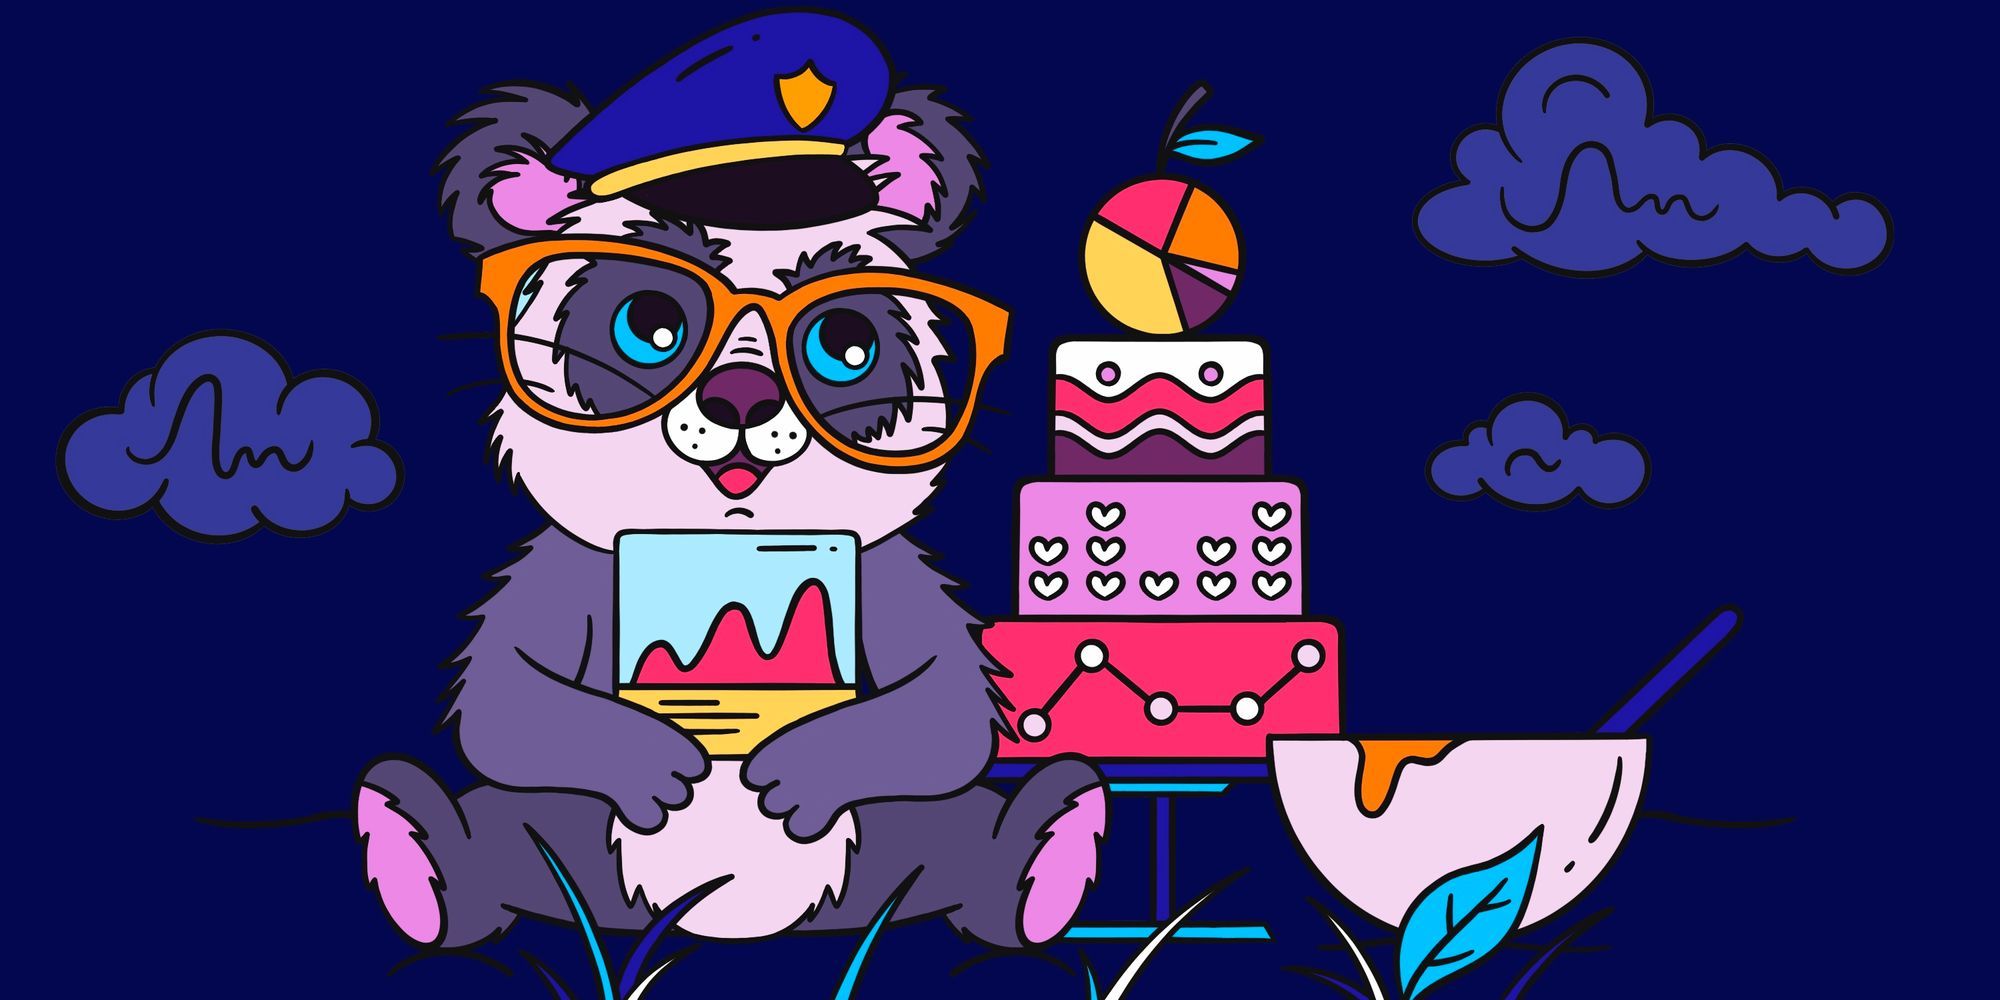 An illustrated image of a koala bear in a police officer hat atop a purple background.